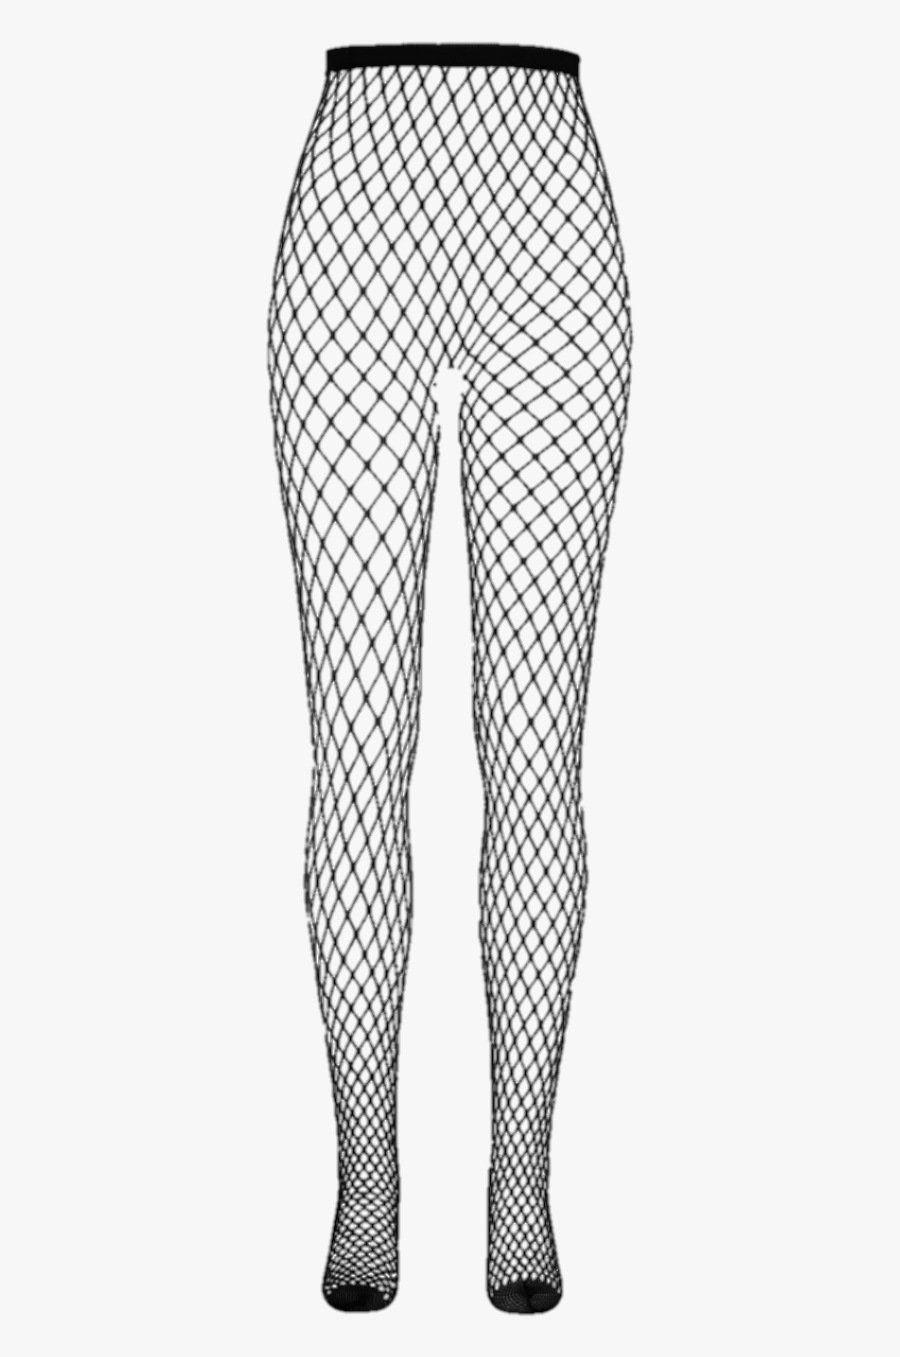 Fish Net Stockings Png, Transparent Clipart